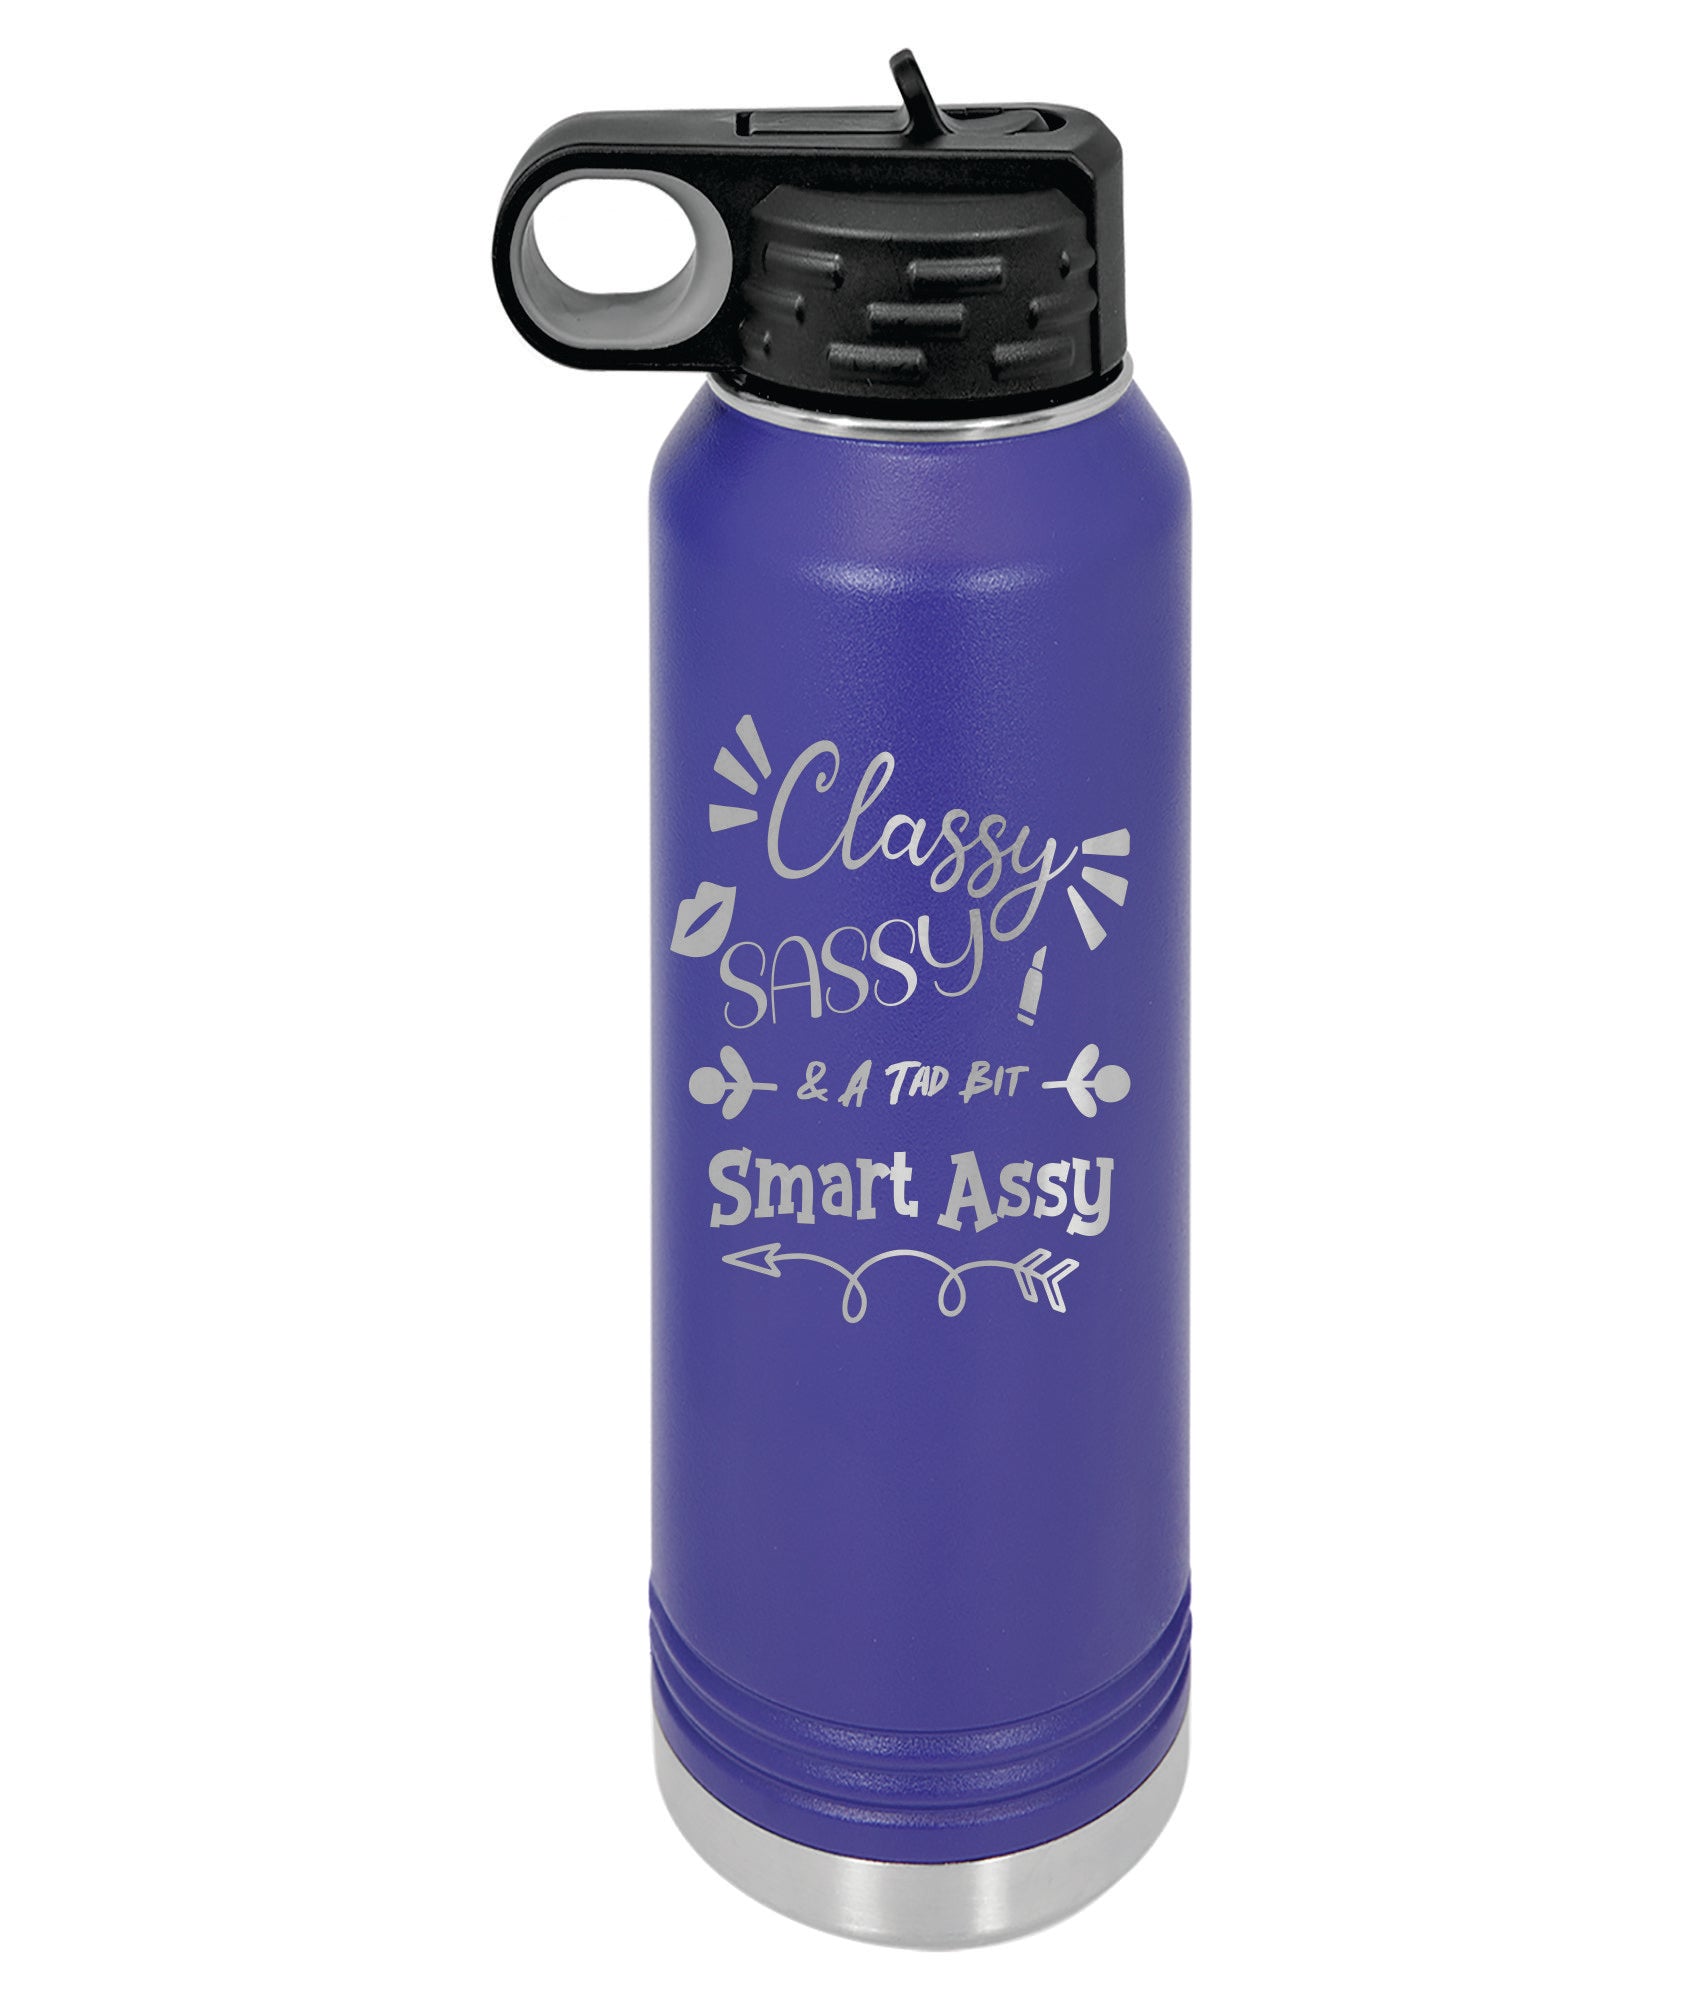 Today's Good Mood Funny Quote Water Bottle by EnvyArt